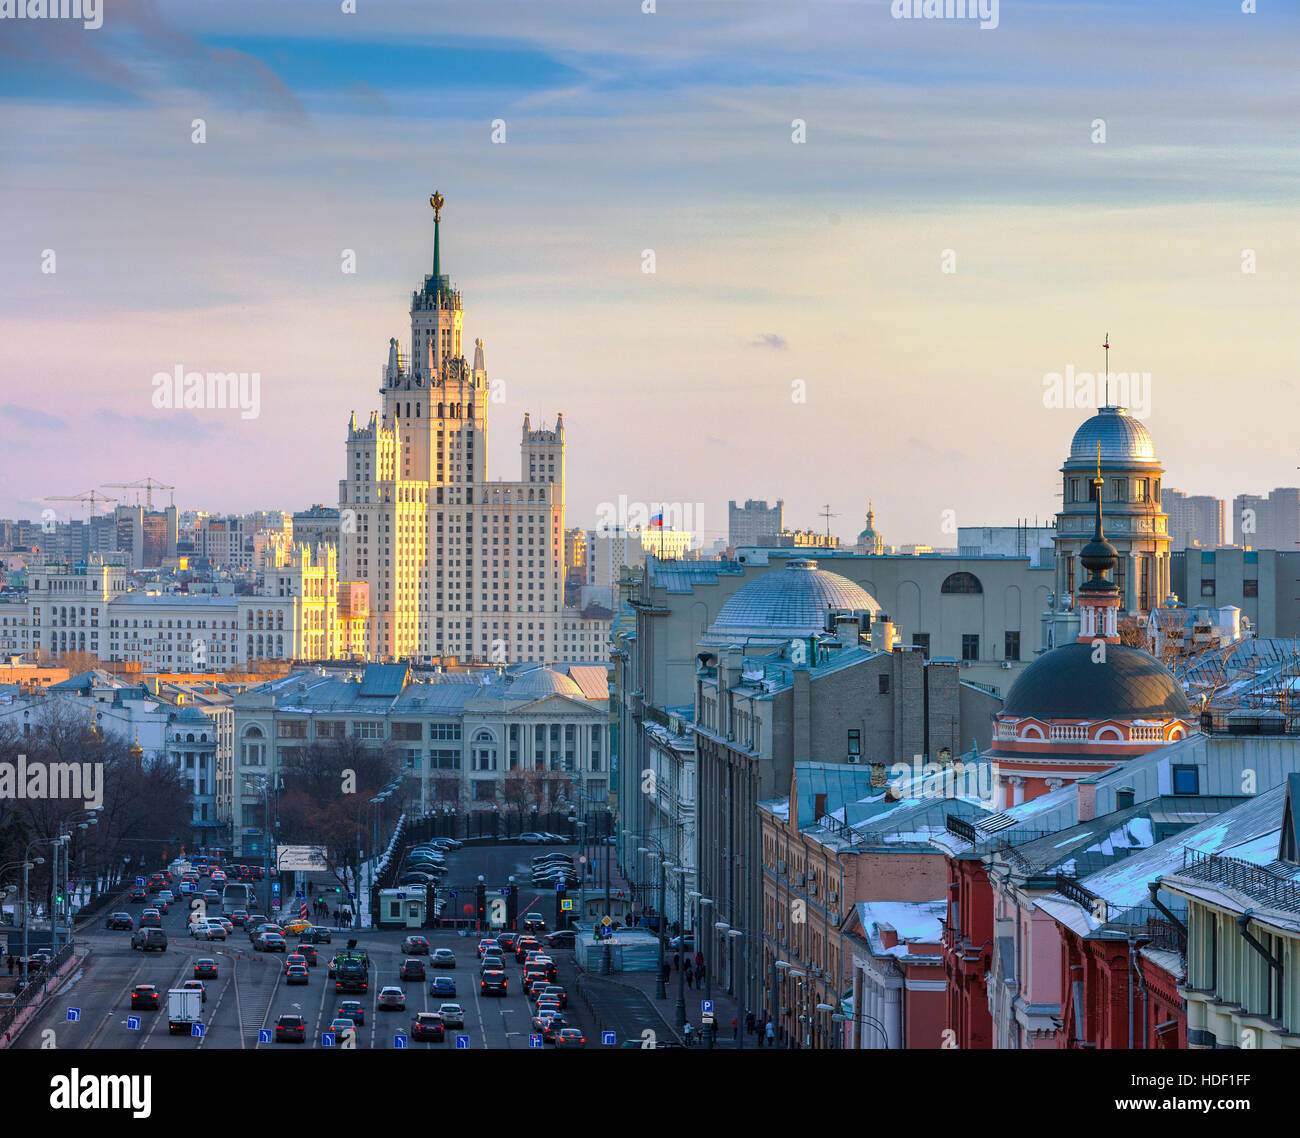 Moscow, view of the skyscraper on Kotelnicheskaya embankment and in the area of Ilyinsky gate. Stock Photo